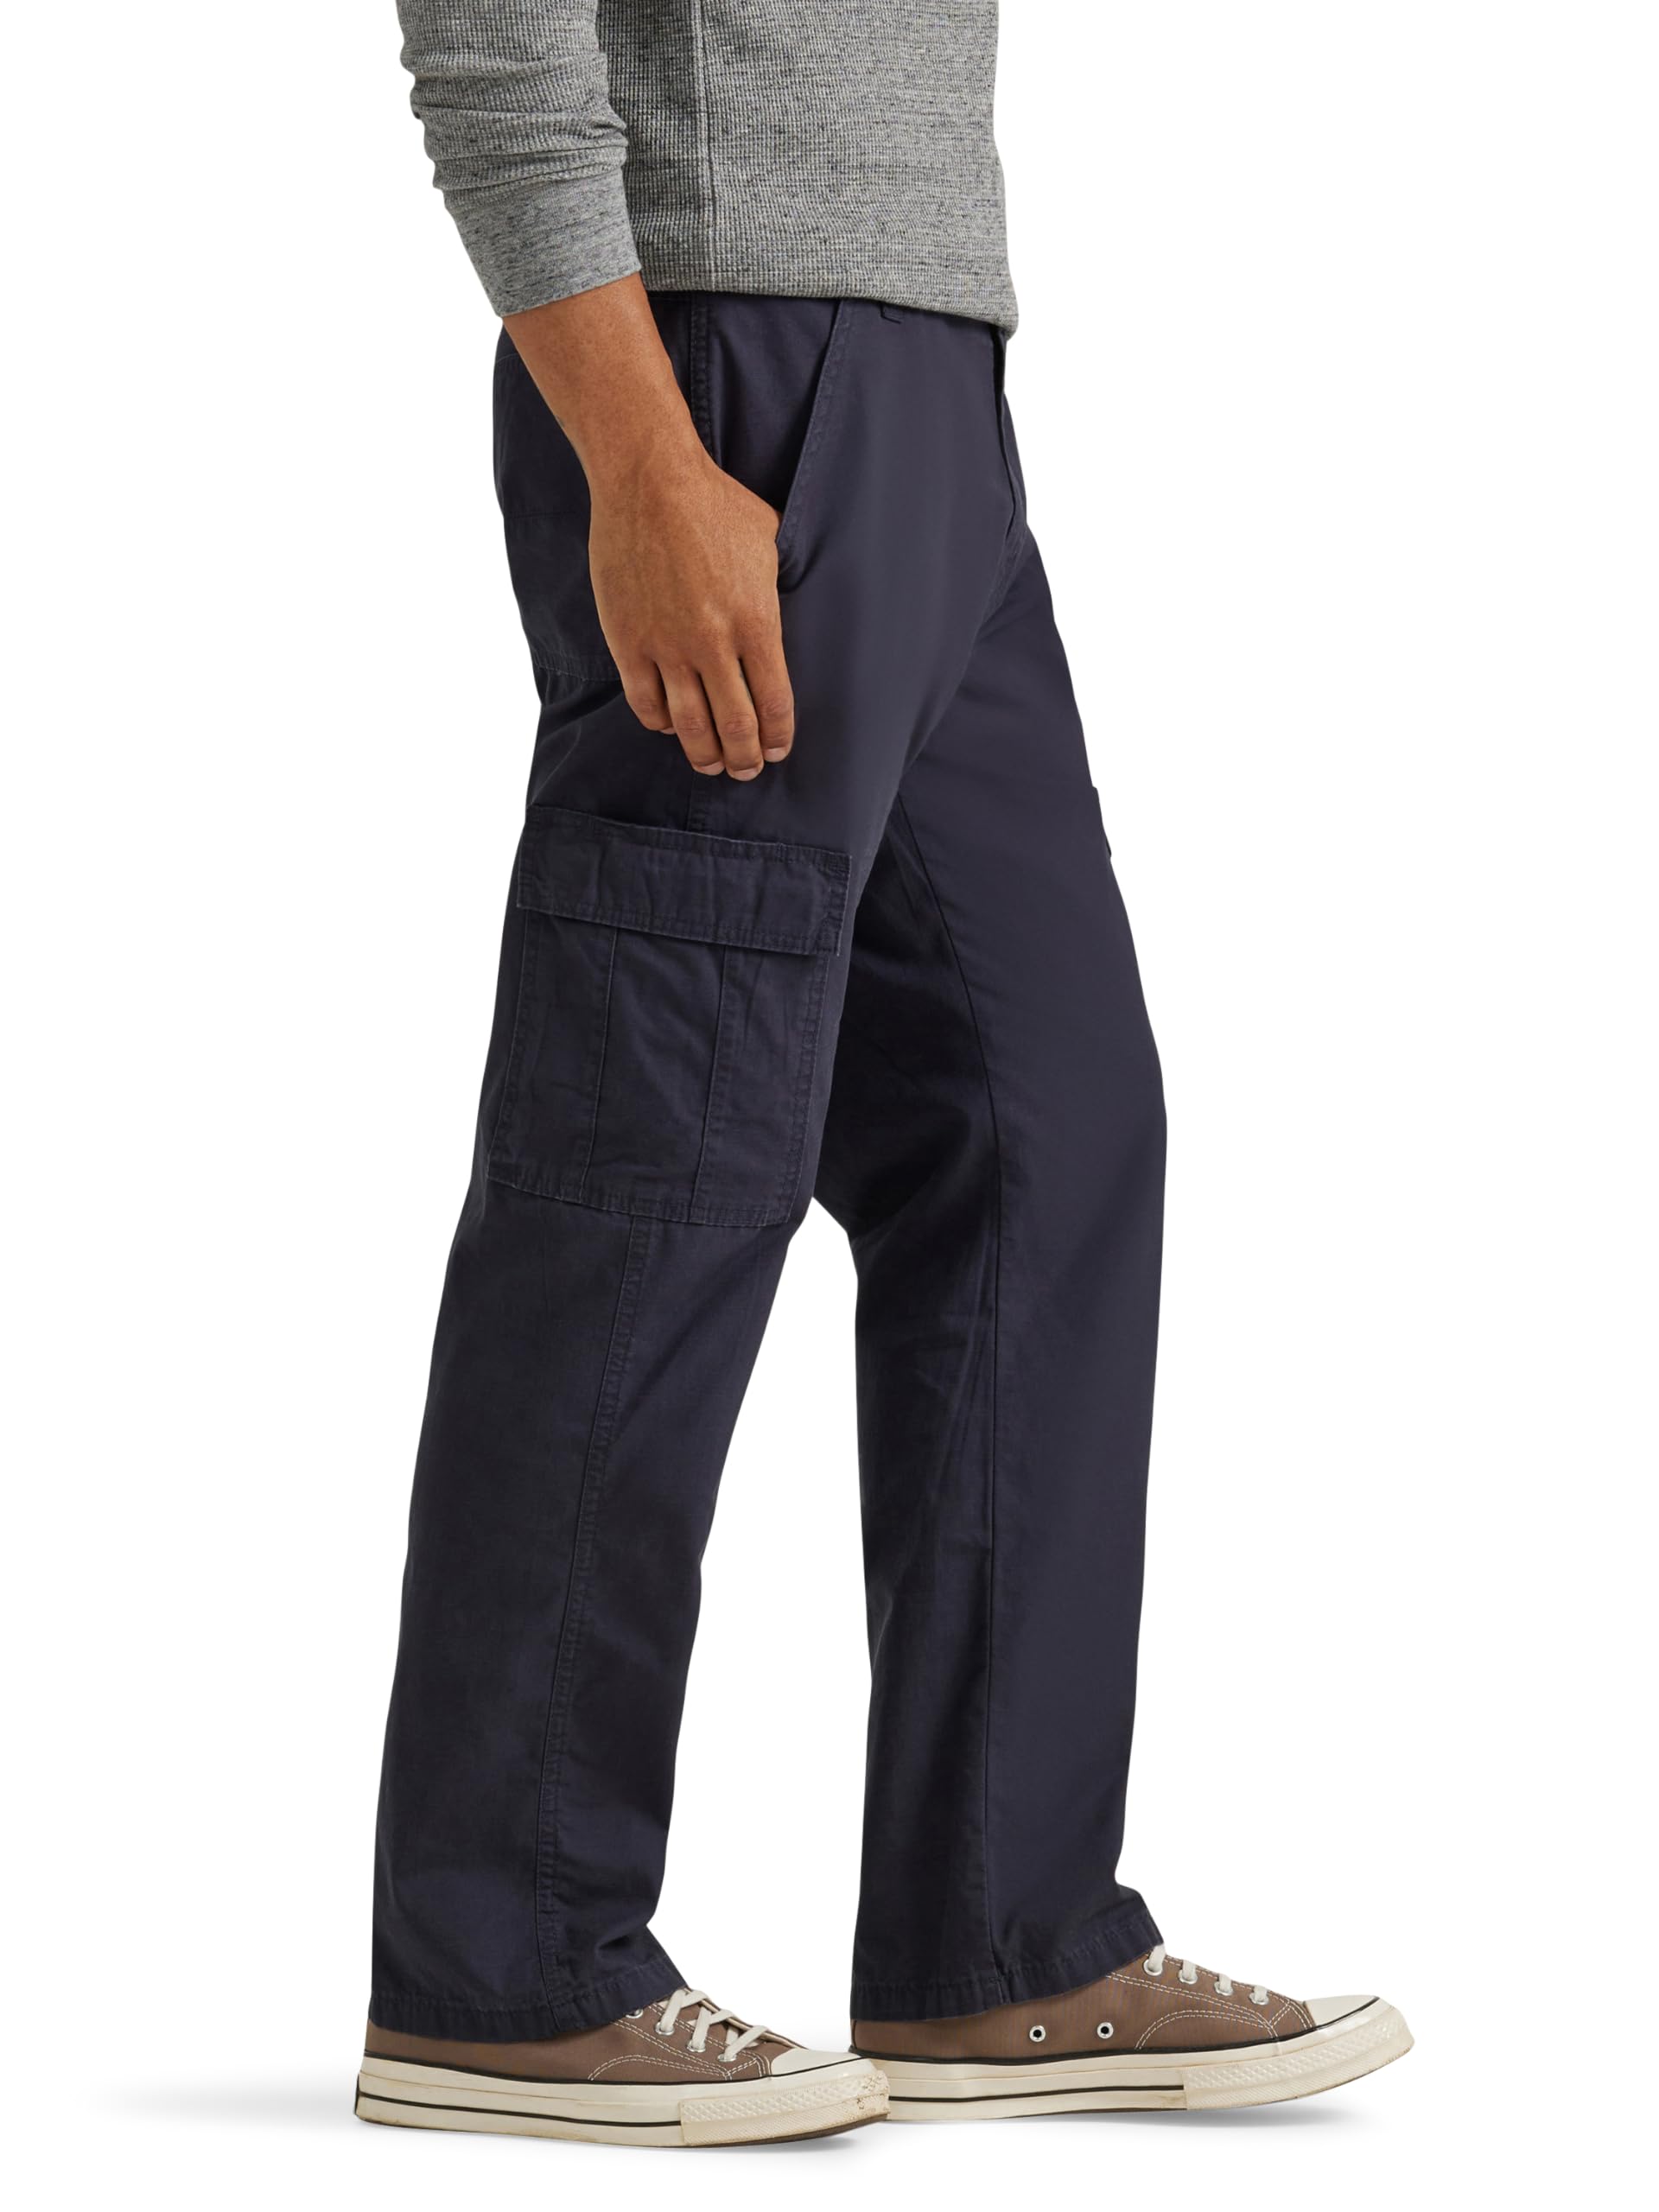 Wrangler Authentics Men’s Twill Relaxed Fit Cargo Pant